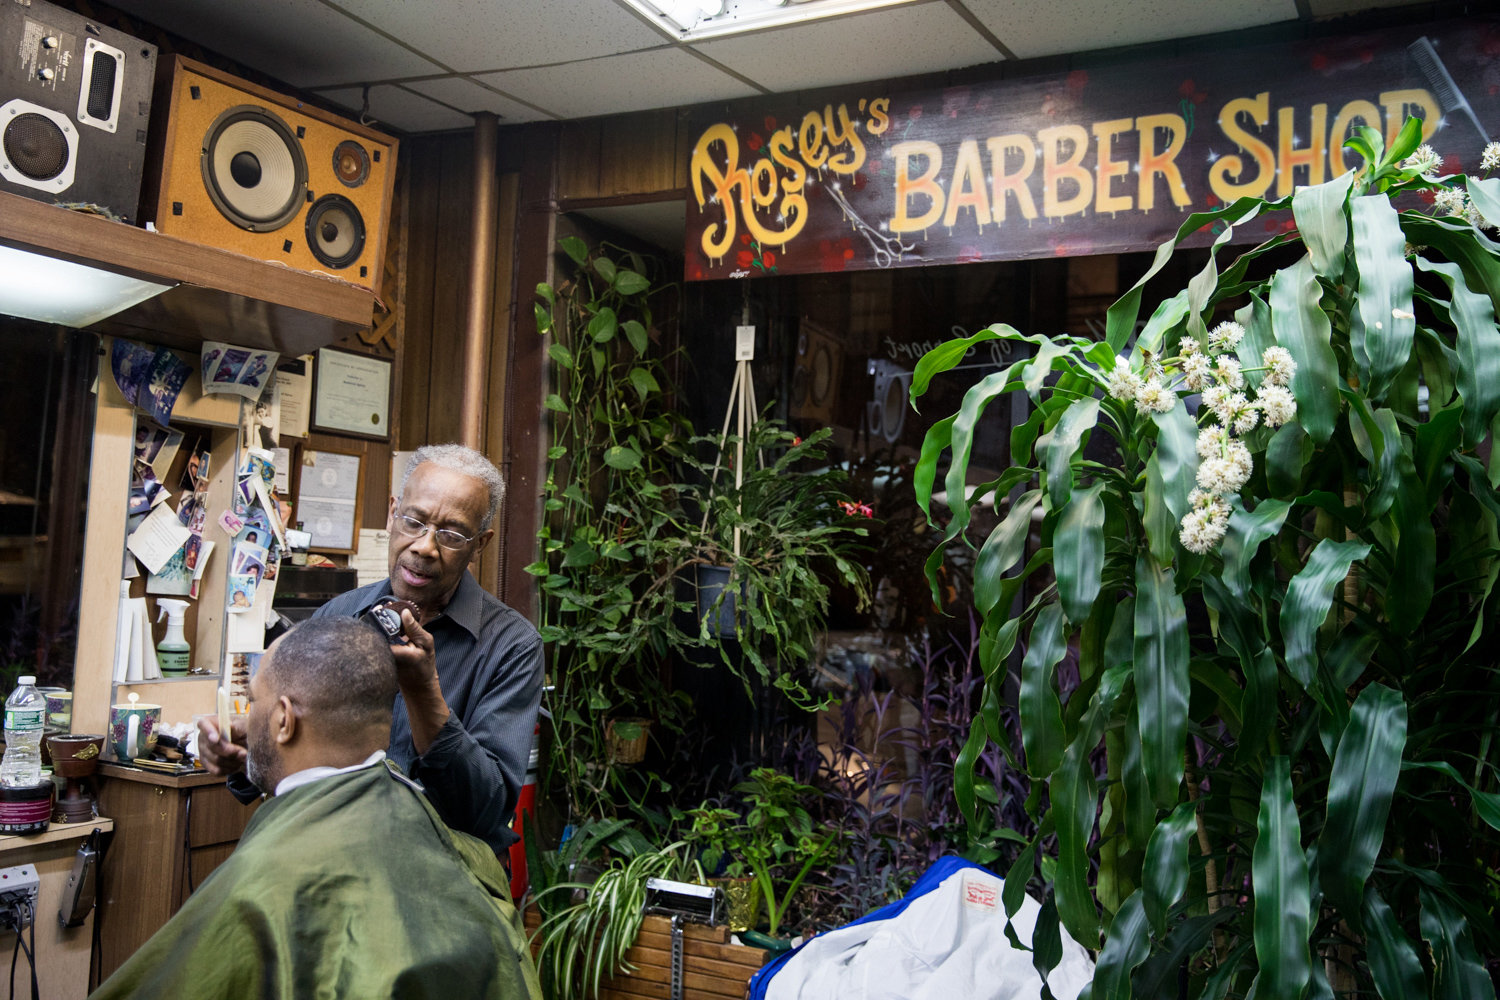 The Rev. J. Loren Russell has been getting his hair cut at Marble Hill’s International Unisex Salon since the ‘70s, with owner Roosevelt Spivey his barber for much of that time. Spivey is a master his clippers, which is what keeps Russell coming back. When Rosey’s business was threatened by a rent hike last year, Russell was confident Spivey would come out on top because the community was on his side.